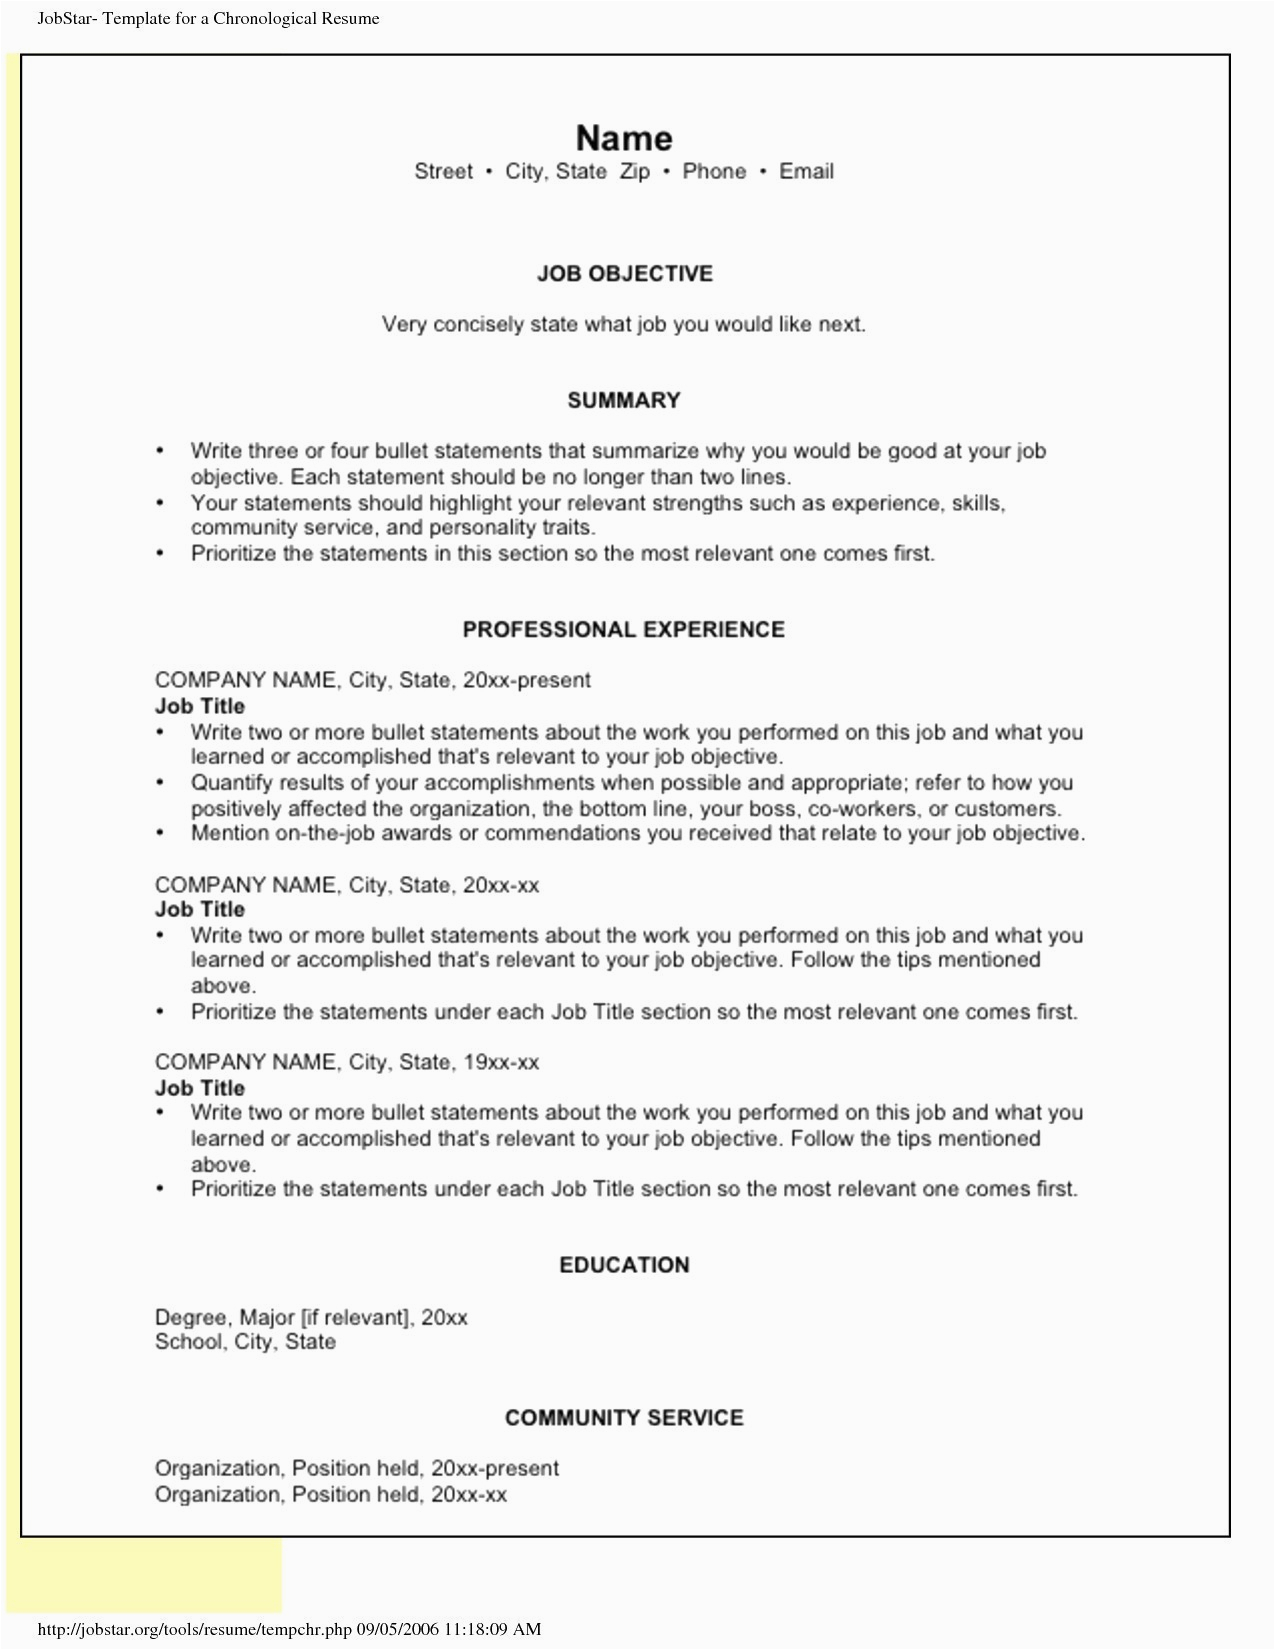 Sample Resume for Housewife Returning to Work 13 Sample Resume Stay at Home Mom Returning to Work